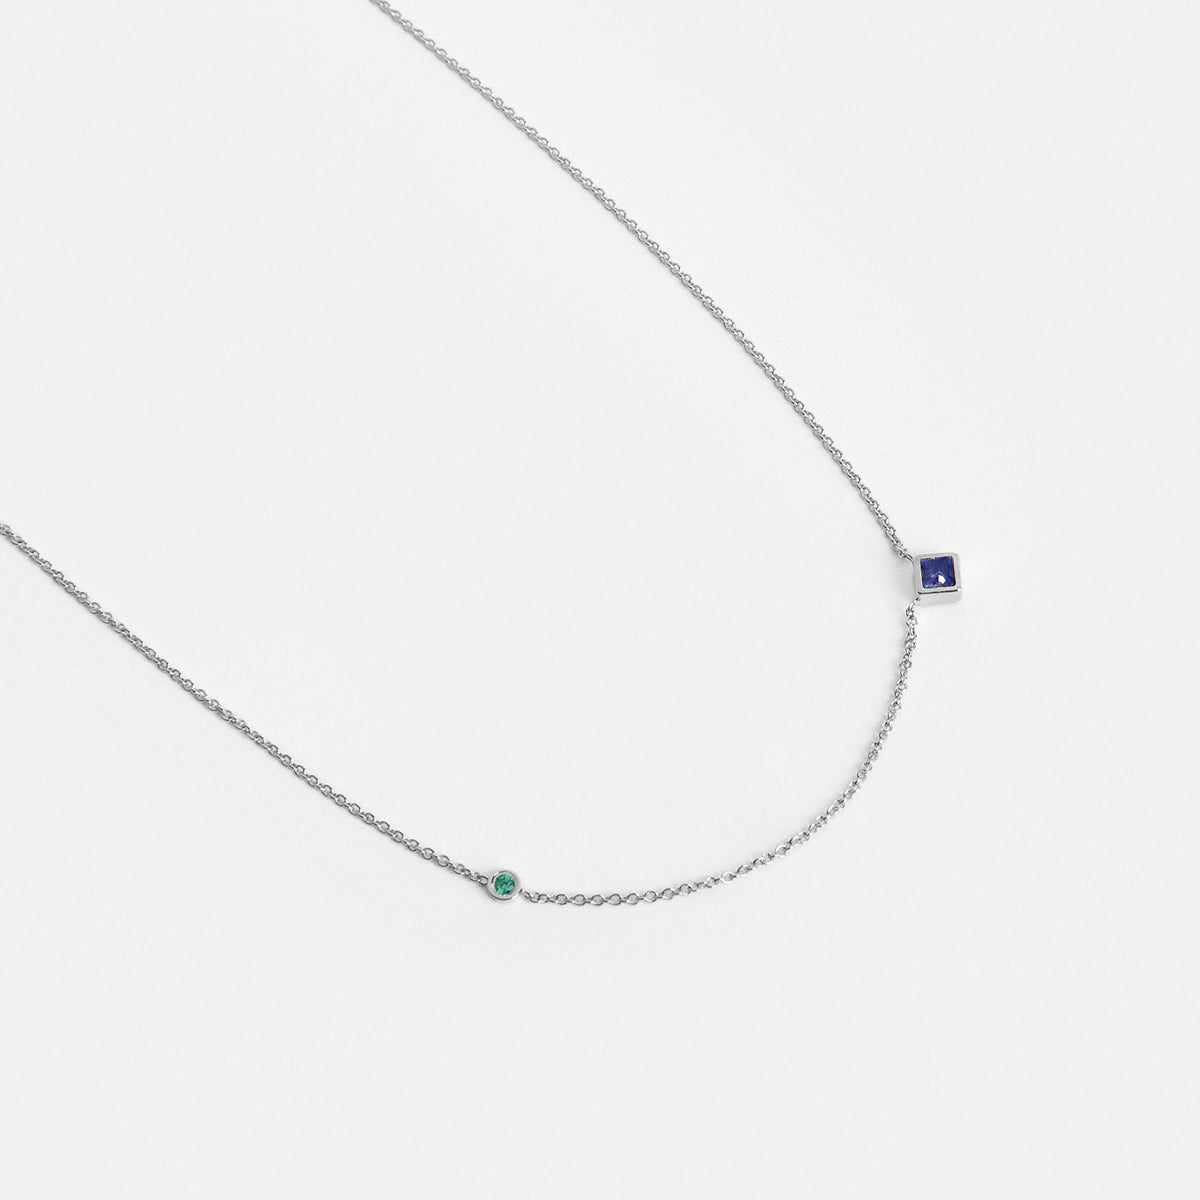 Isu Unique Necklace in 14k White Gold set with Emerald and Sapphire By SHW Fine Jewelry NYC